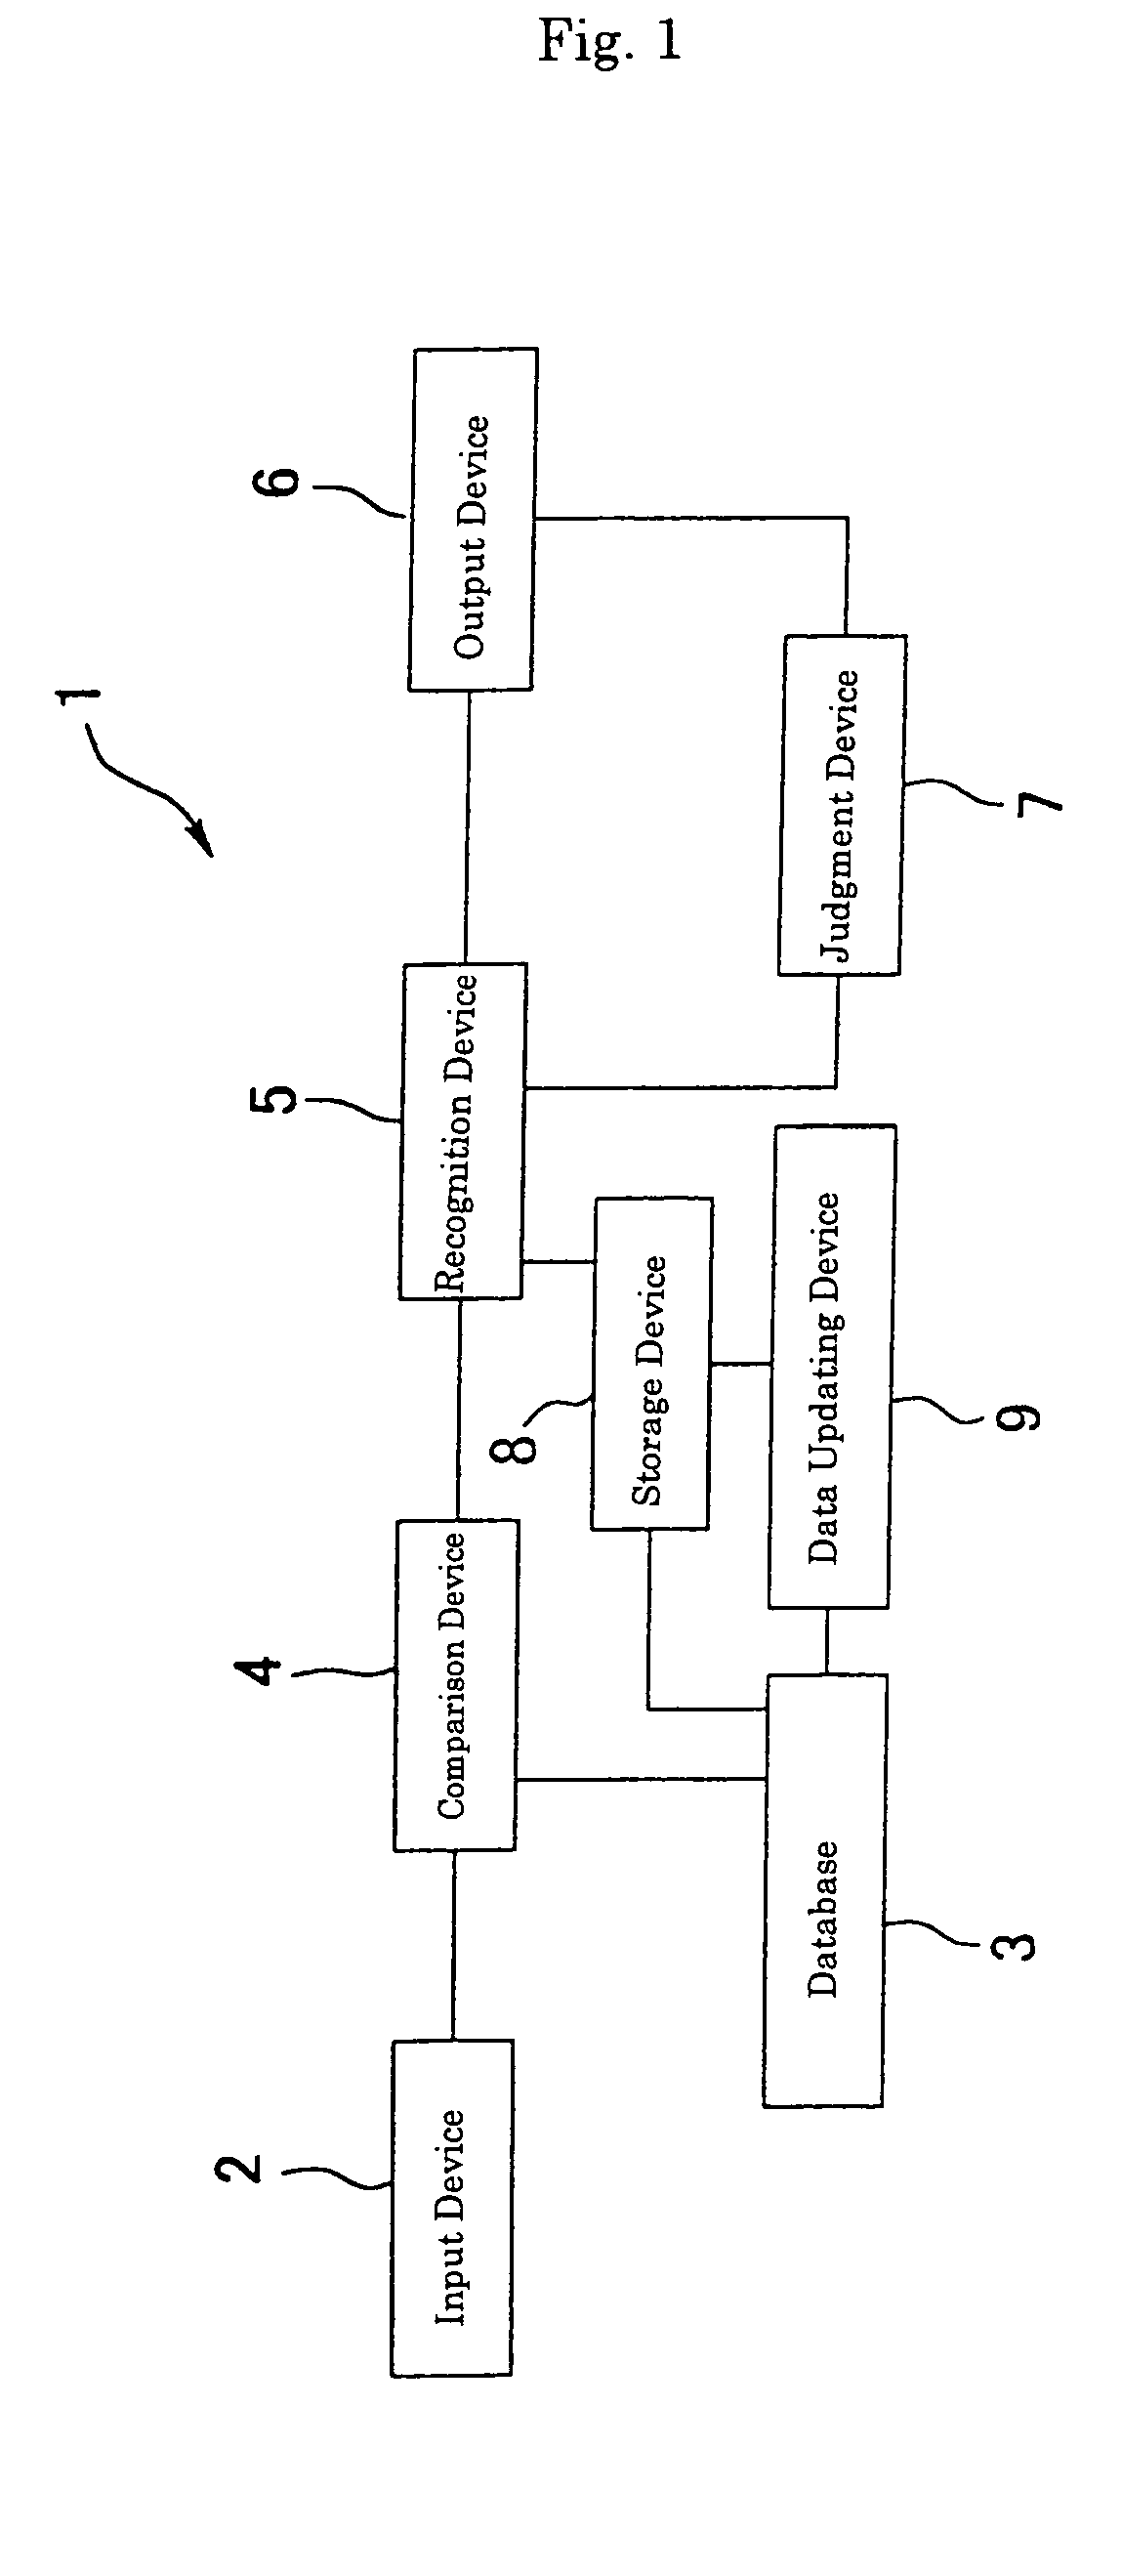 Automatic guide apparatus for traffic facilities